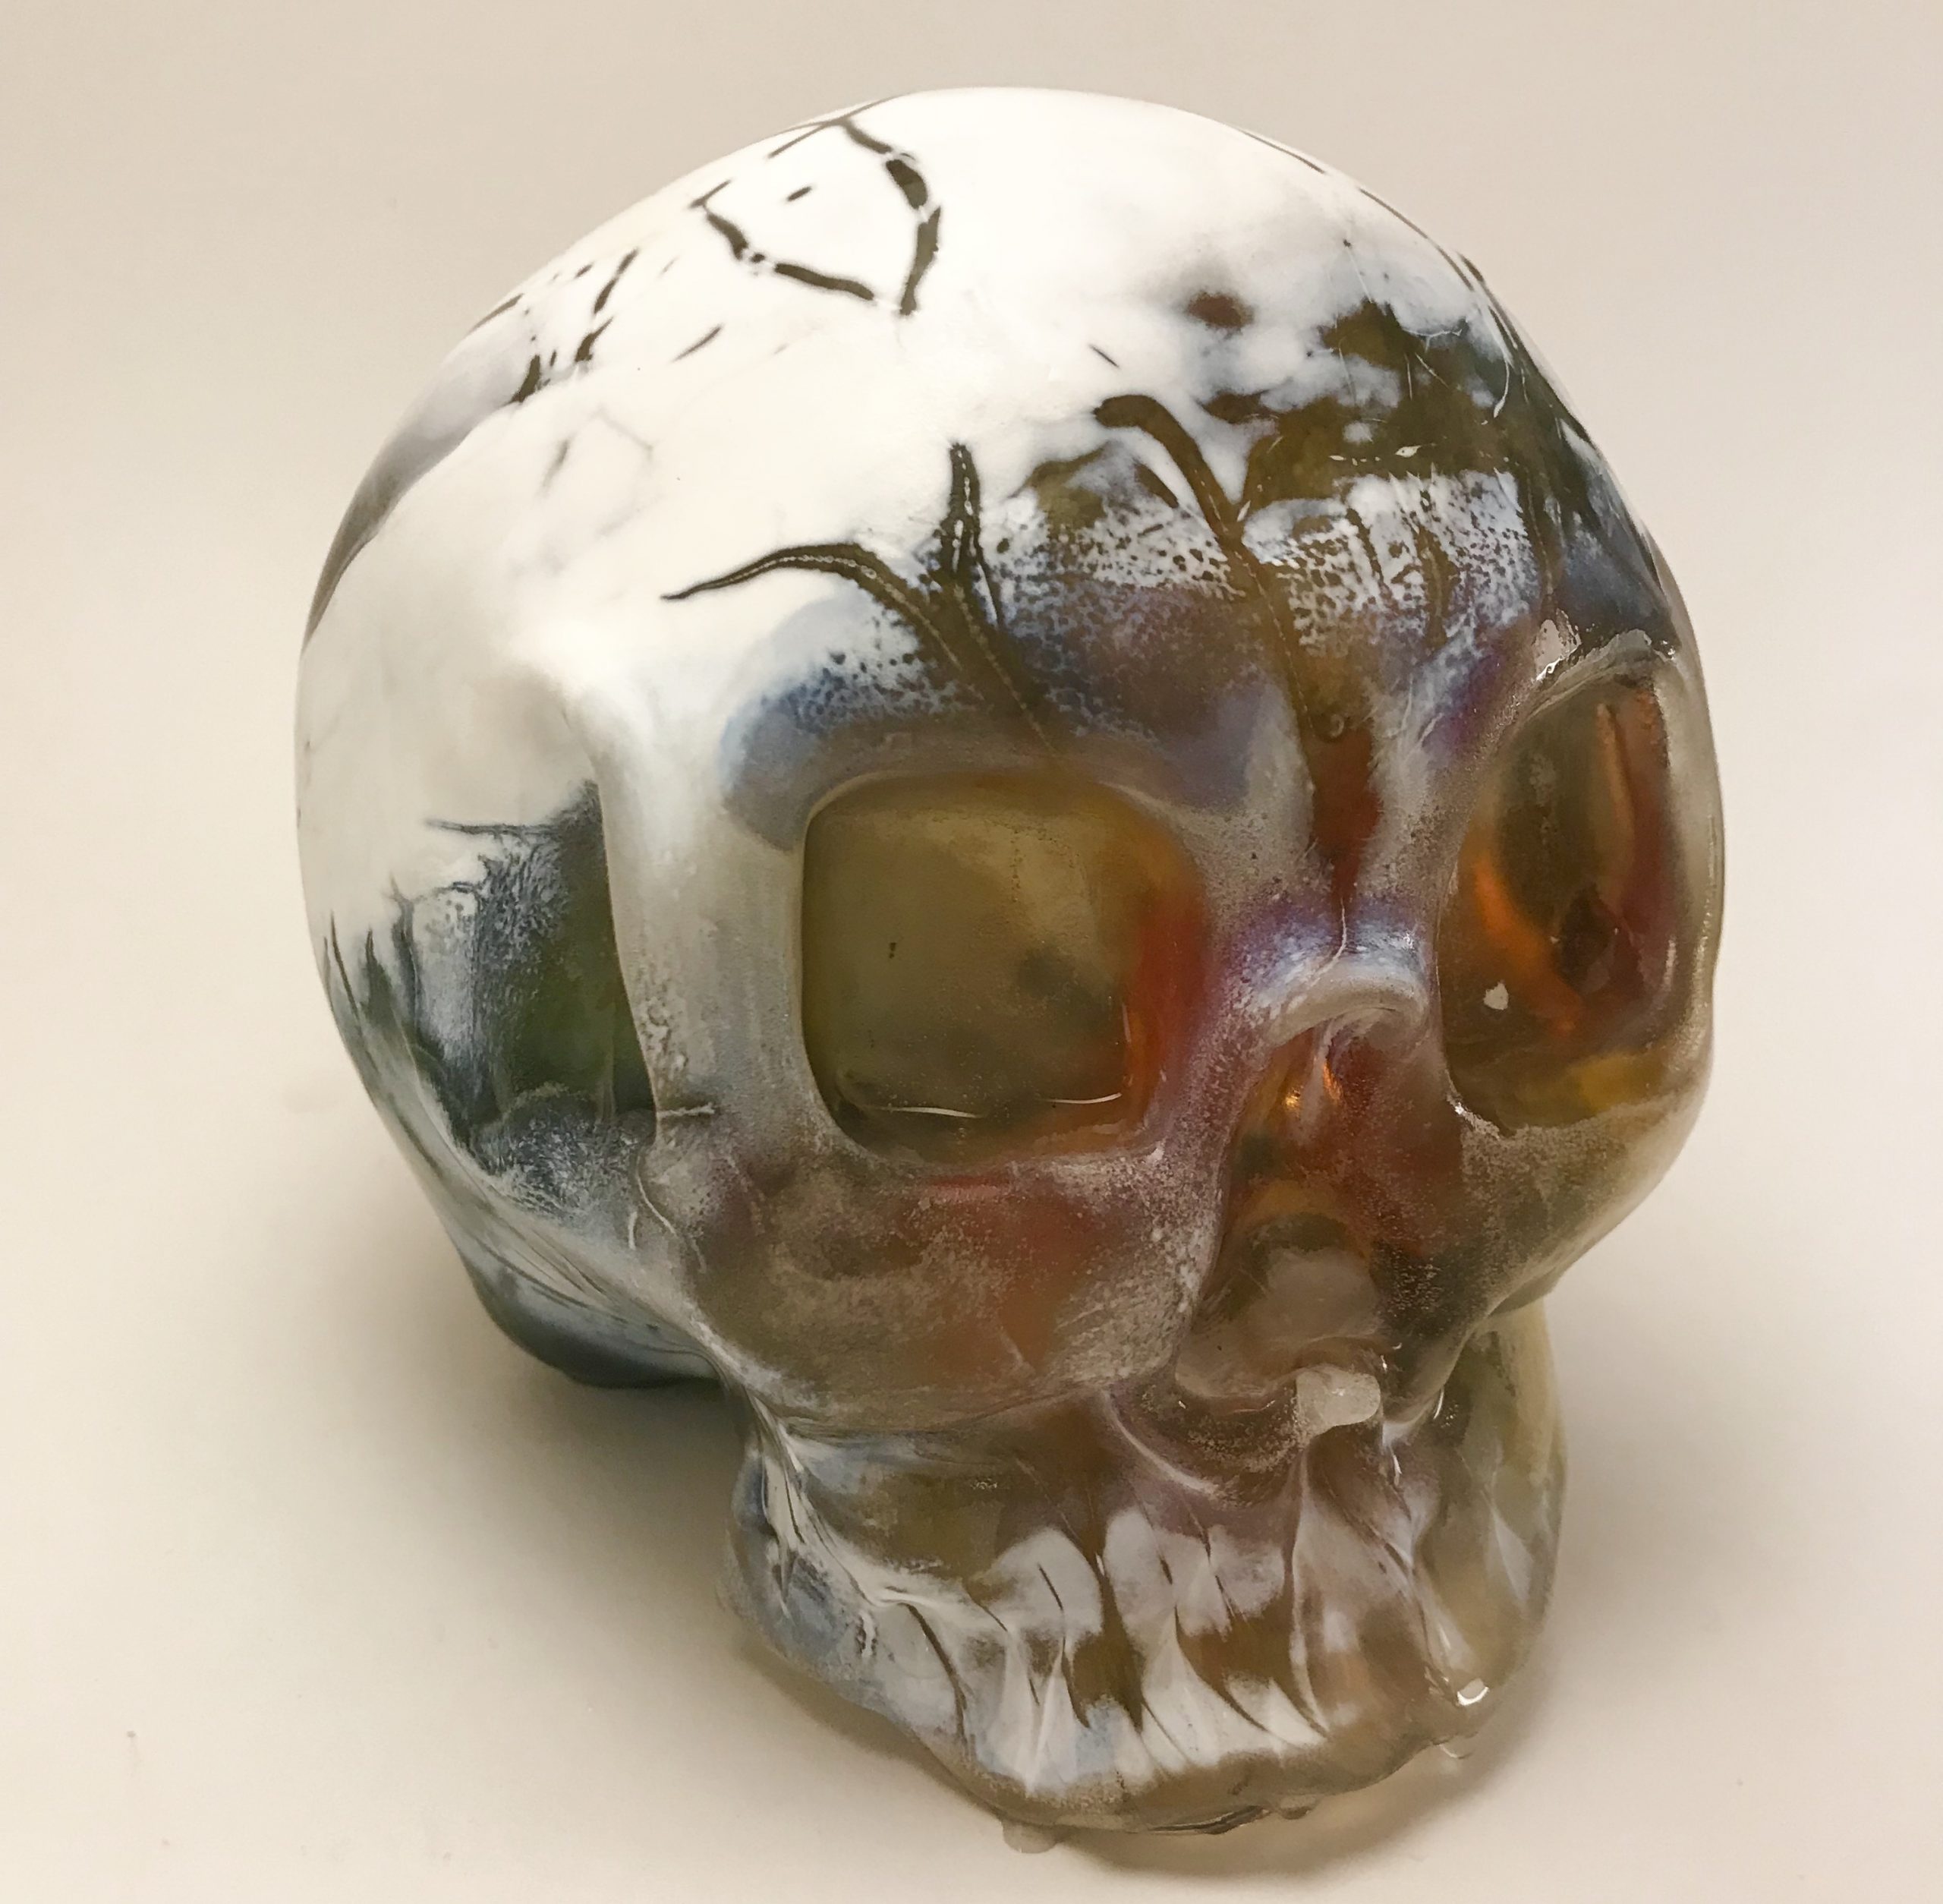 Glass sculpture of skull with cracked white exterior and rainbow interior